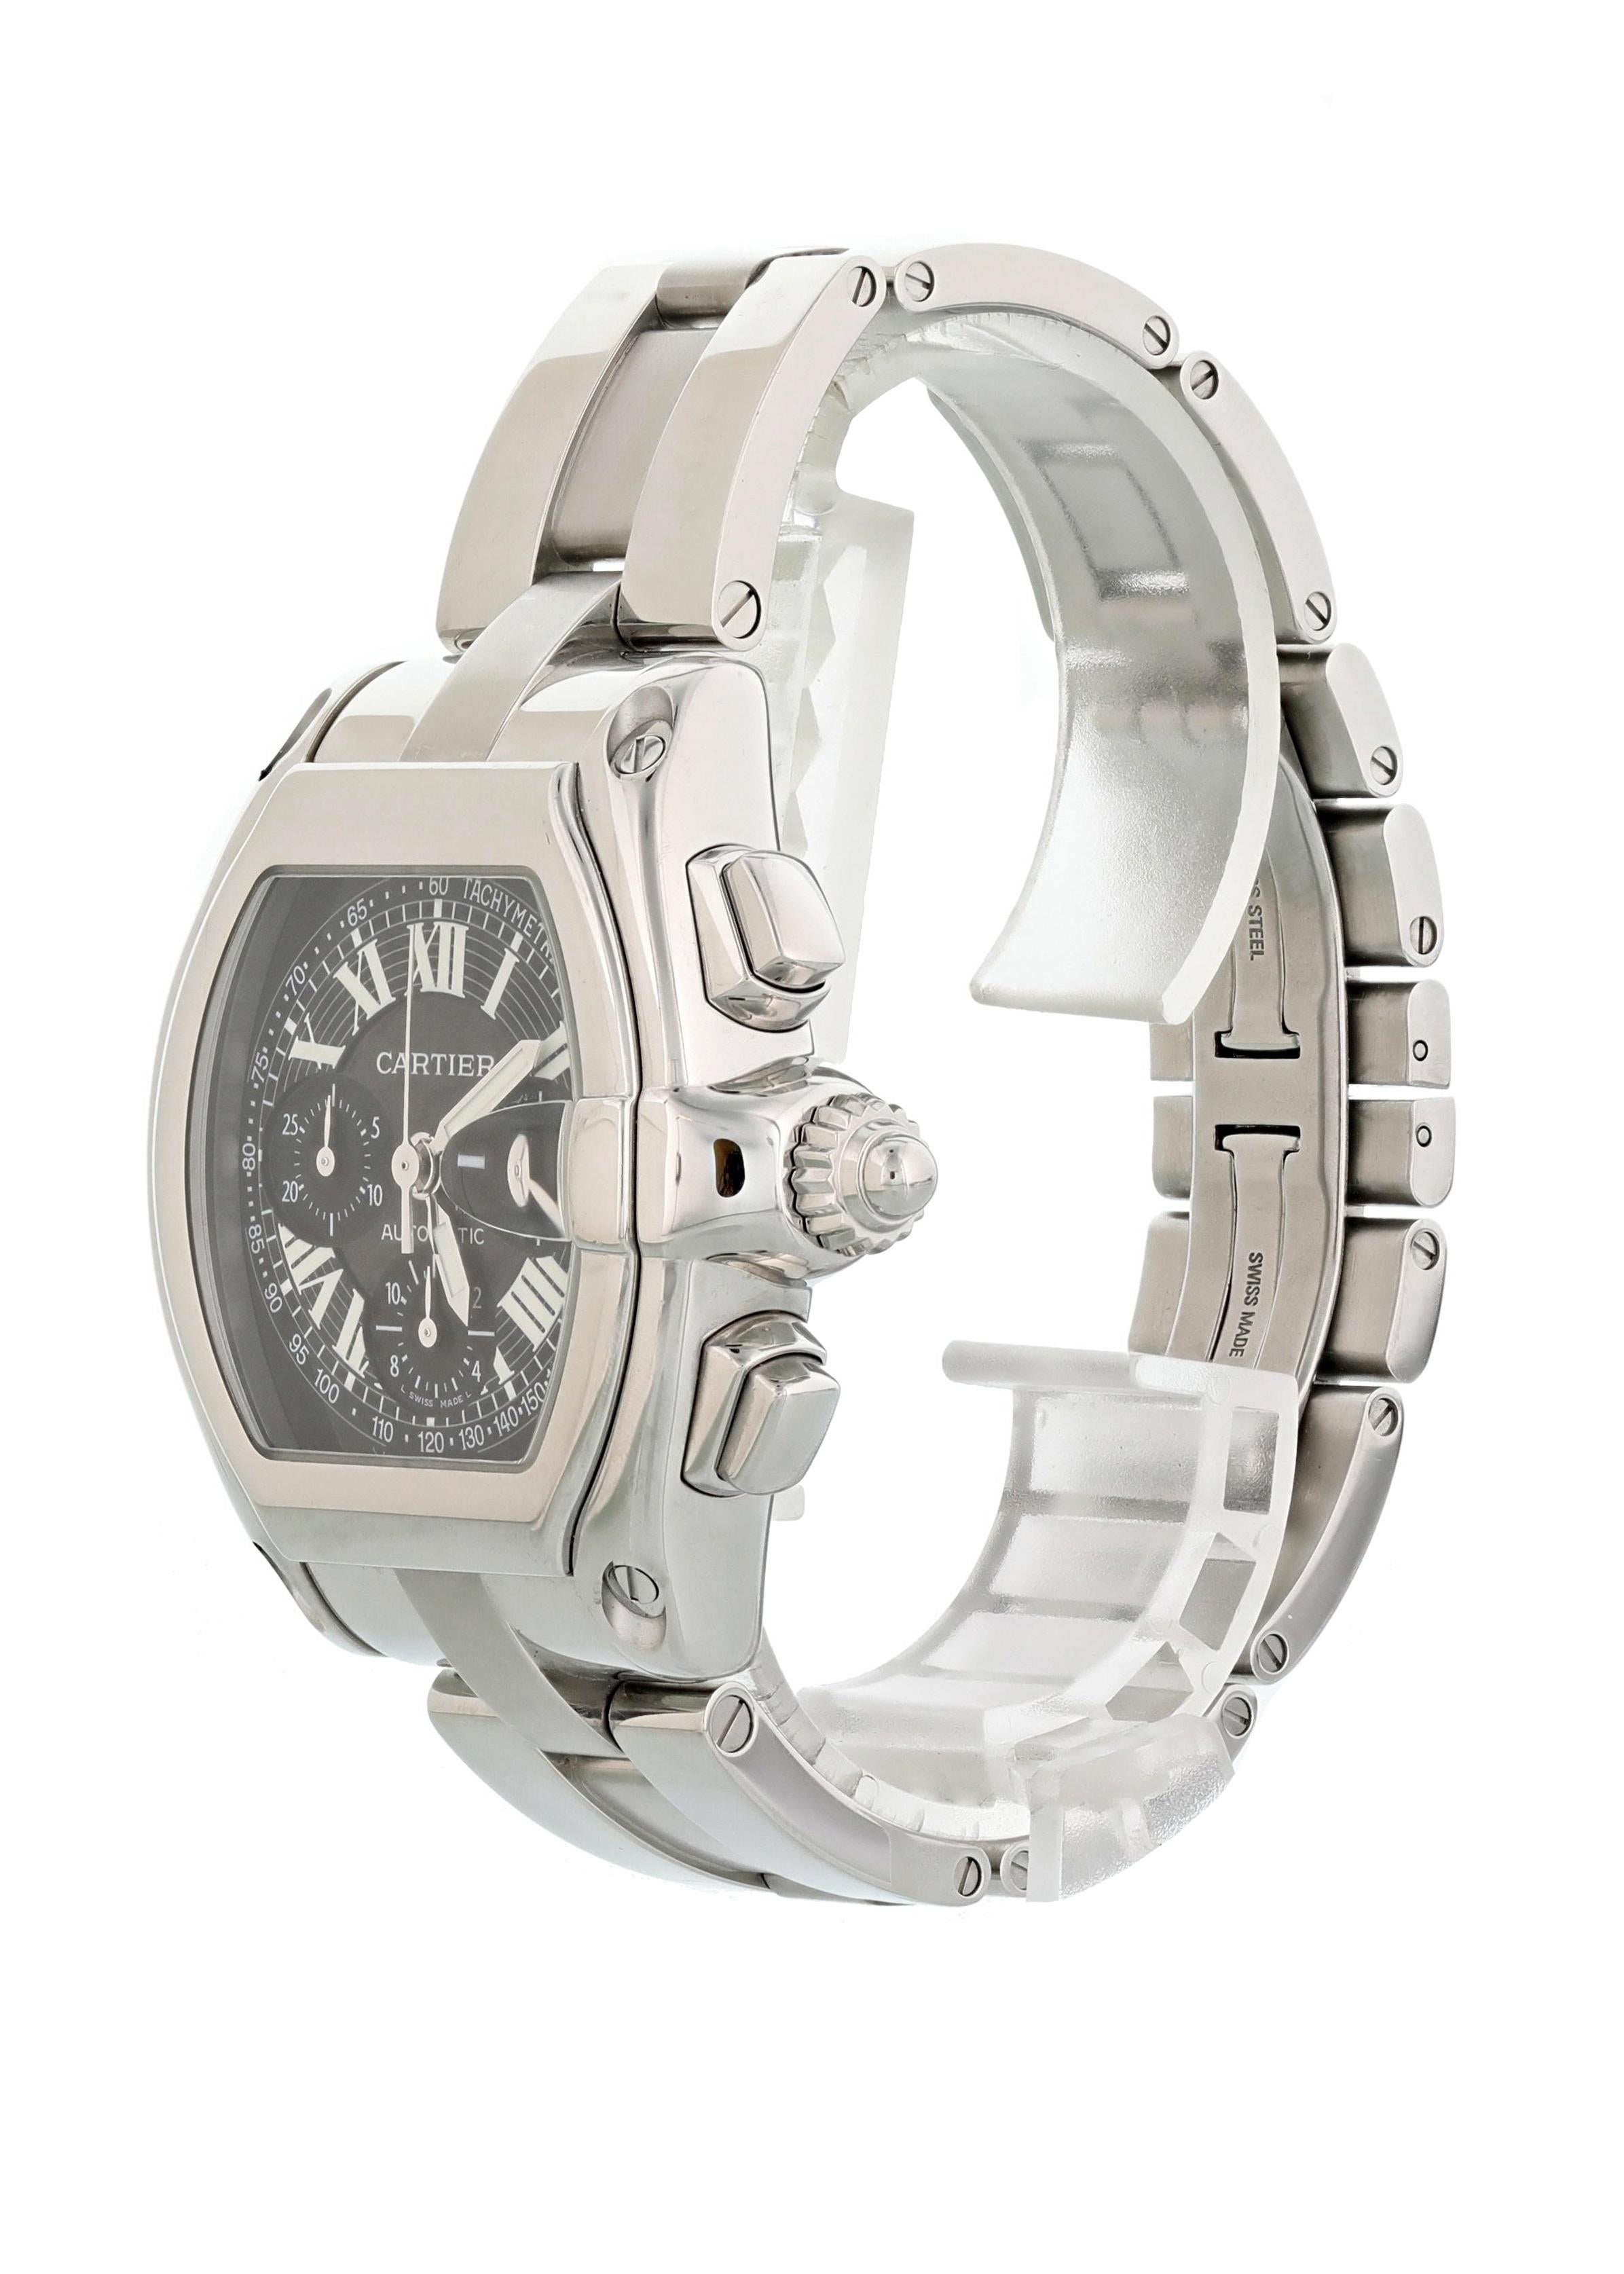 Cartier Roadster XL Chronograph 2618 Mens Watch. Stainless steel 42mm case with a smooth bezel. Black dial with luminous hands and white Roman numeral hour markers. Magnified date display at the 3 o'clock position. Tachymetre indicator markers on